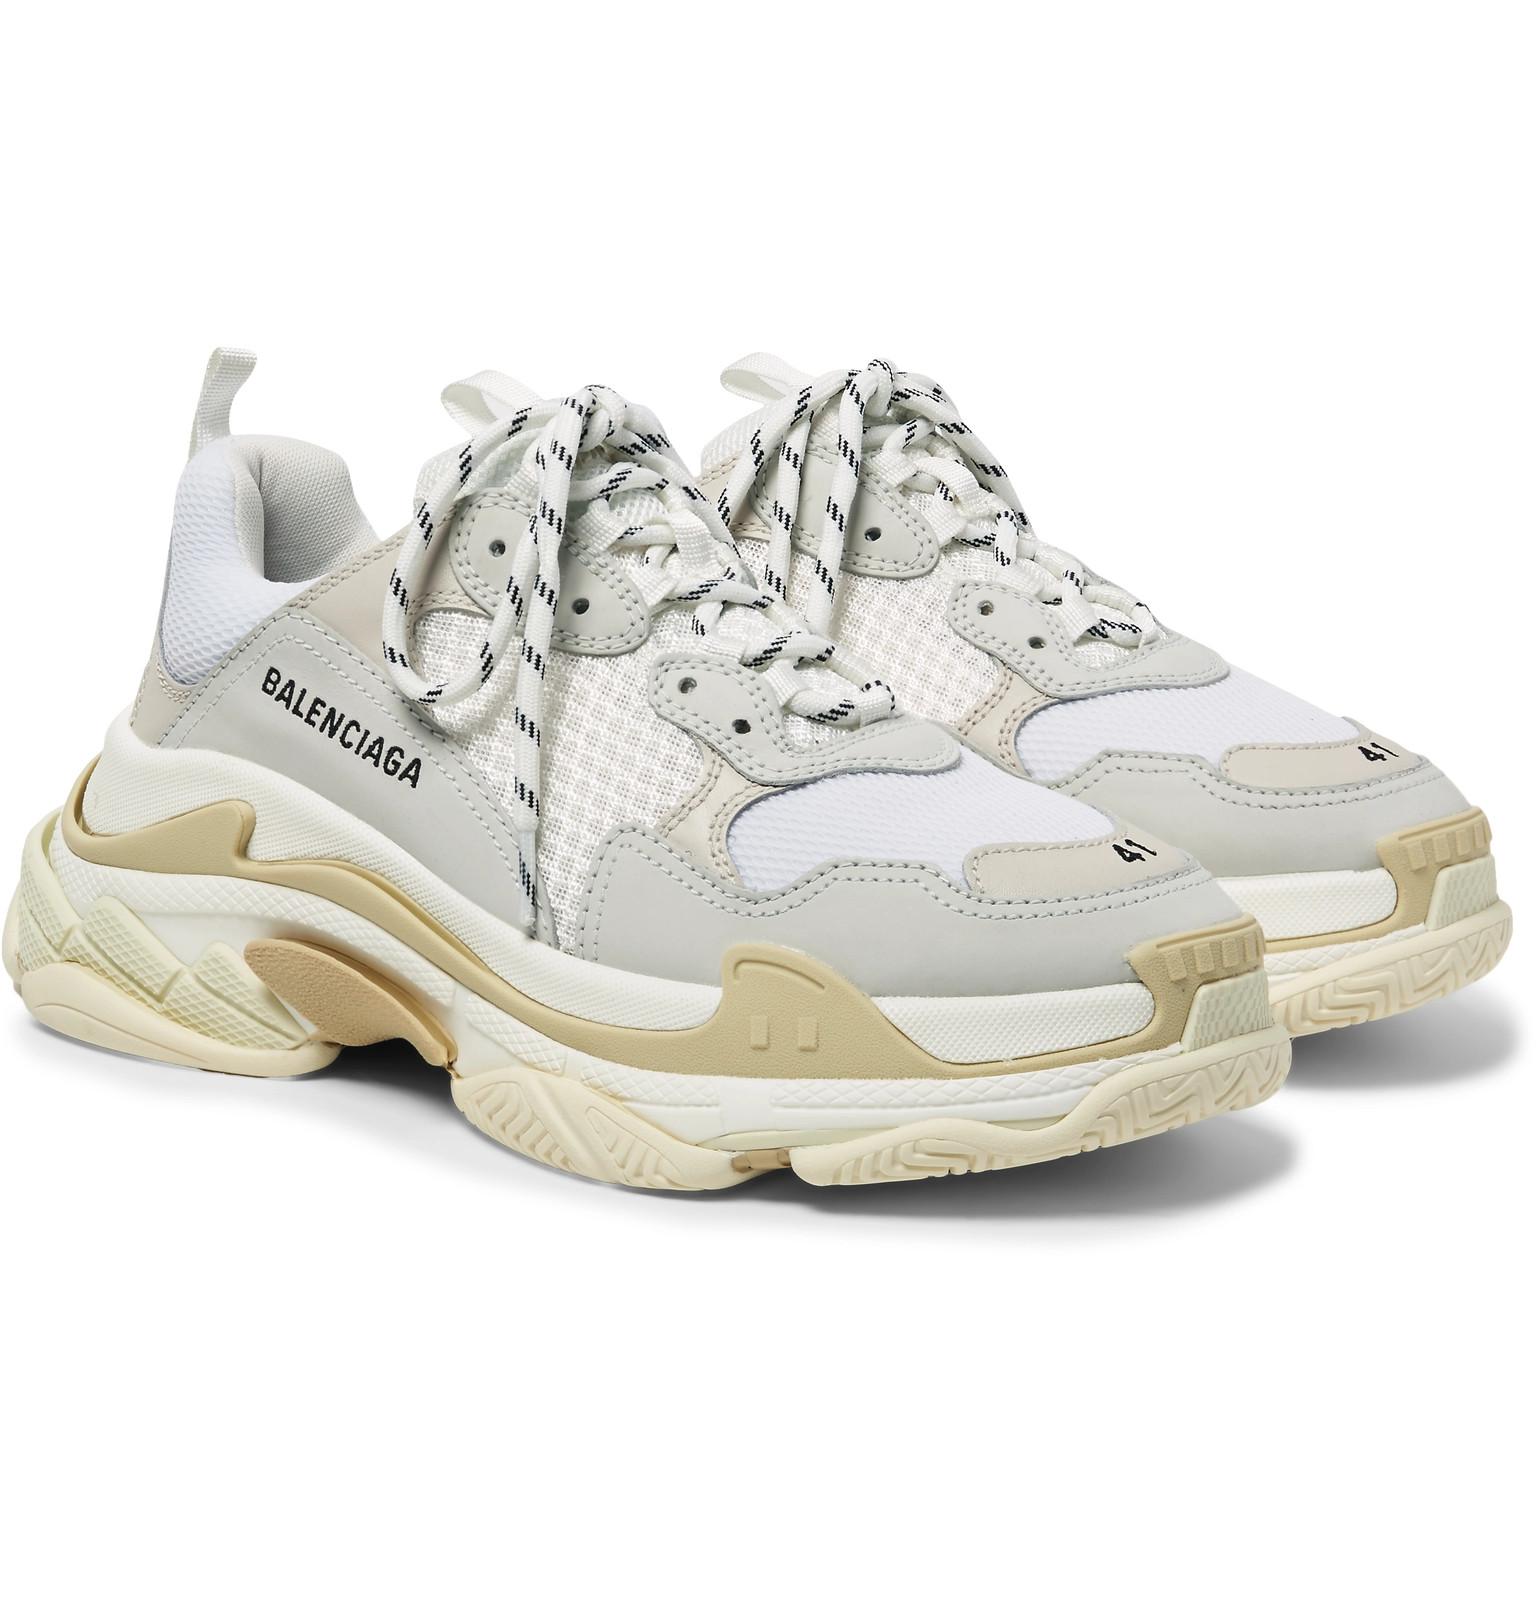 Balenciaga Triple S Sneakers In Mesh And Leather in White - Save 63% - Lyst